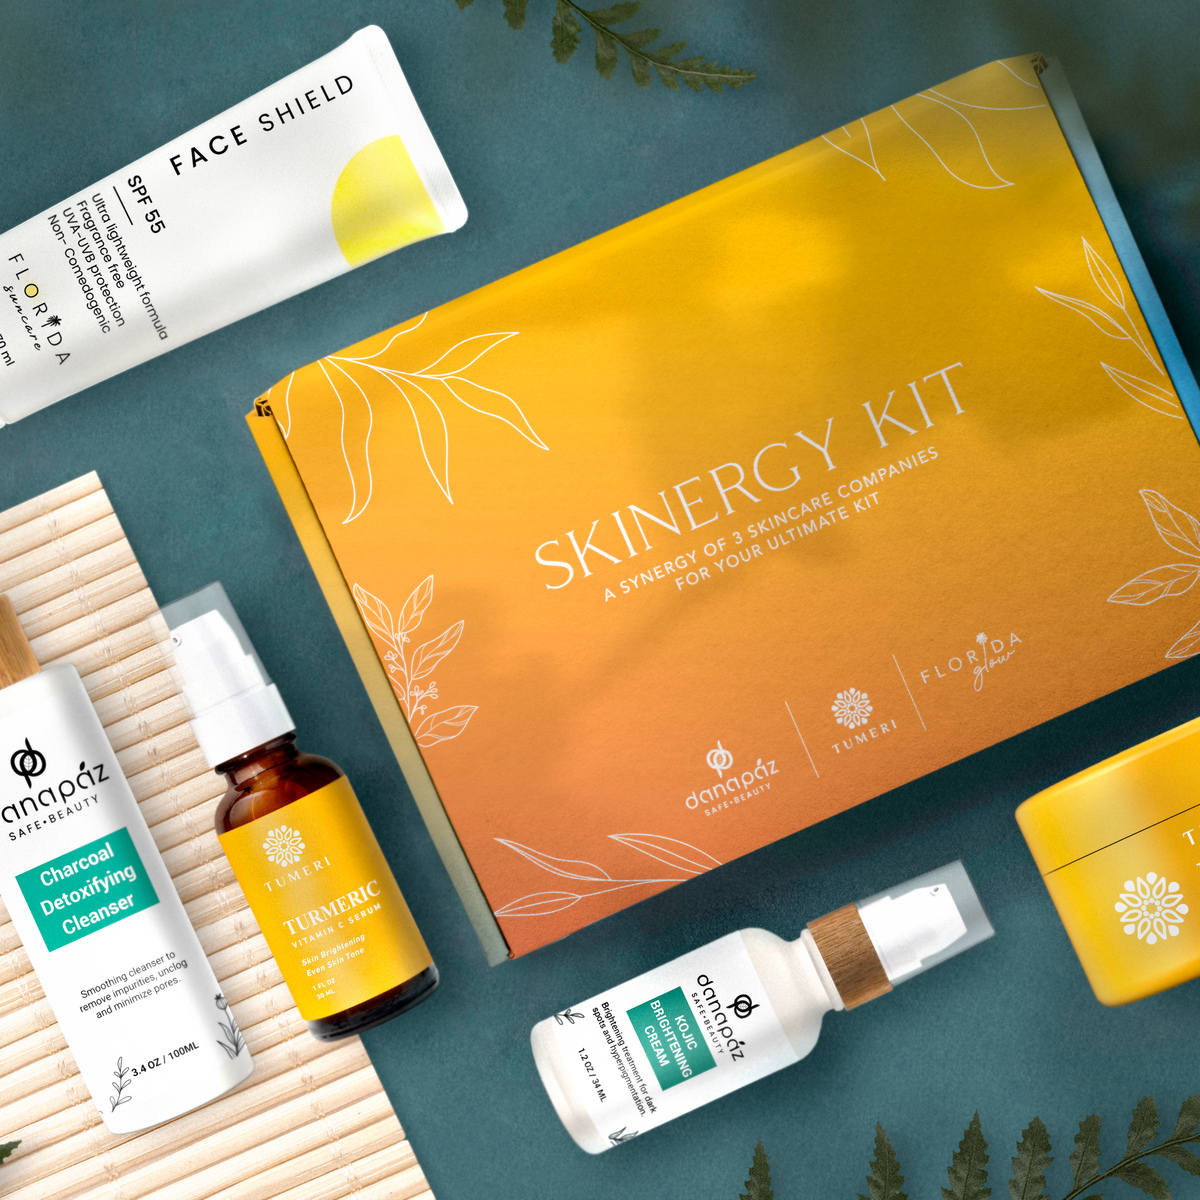 Skinergy Kit (Limited Edition Collab)